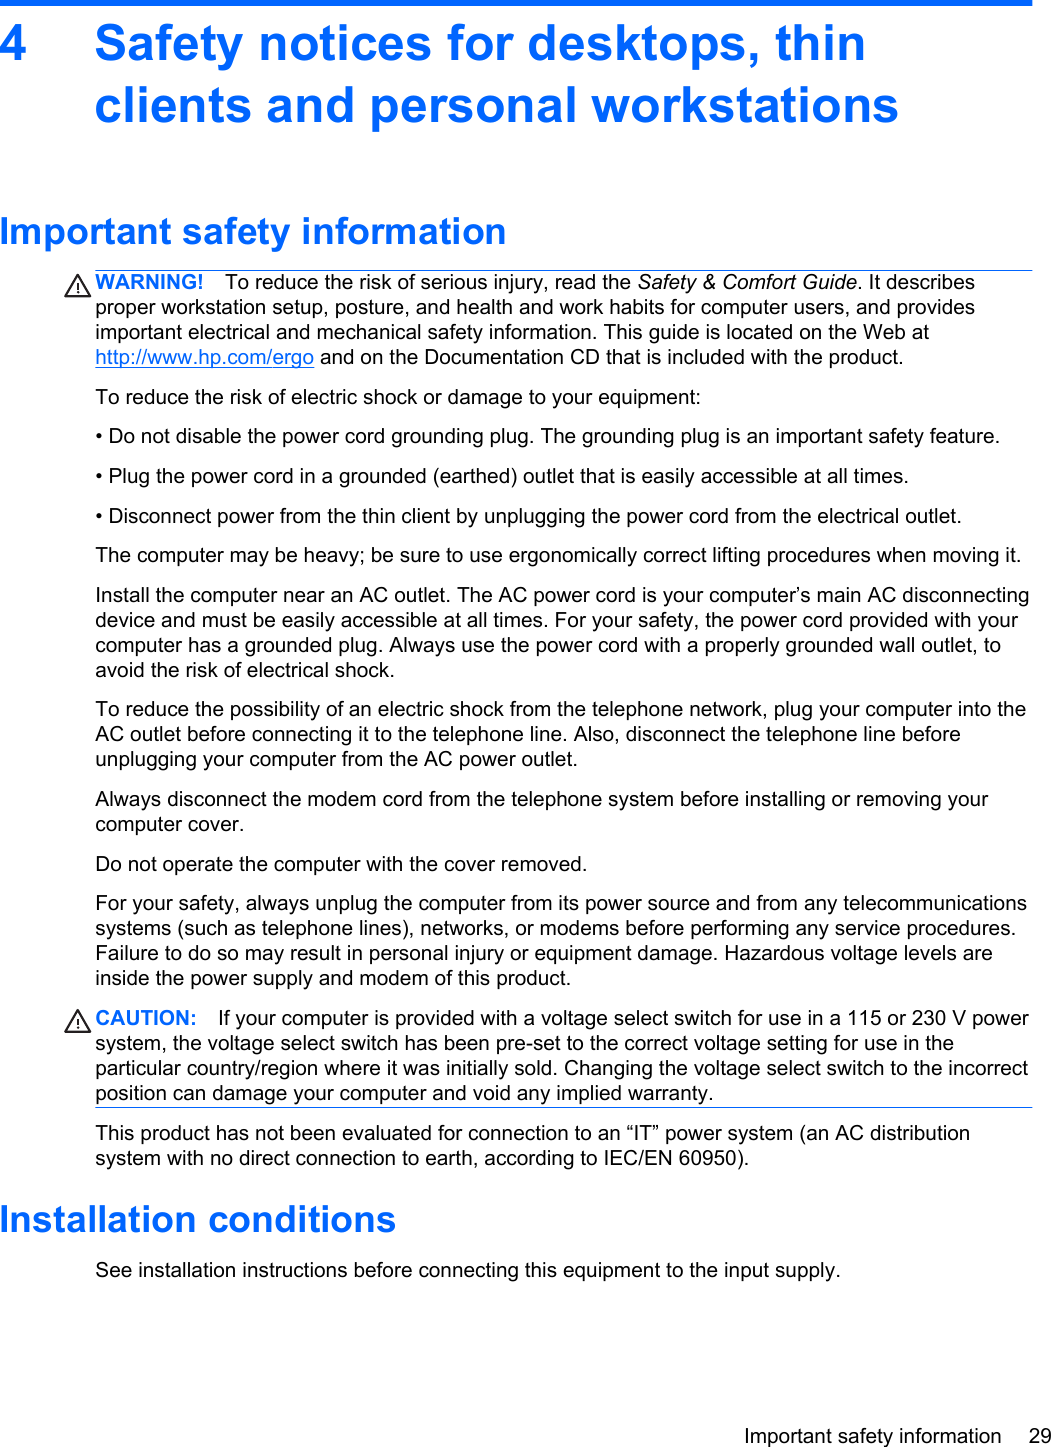 4 Safety notices for desktops, thinclients and personal workstationsImportant safety informationWARNING! To reduce the risk of serious injury, read the Safety &amp; Comfort Guide. It describesproper workstation setup, posture, and health and work habits for computer users, and providesimportant electrical and mechanical safety information. This guide is located on the Web athttp://www.hp.com/ergo and on the Documentation CD that is included with the product.To reduce the risk of electric shock or damage to your equipment:• Do not disable the power cord grounding plug. The grounding plug is an important safety feature.• Plug the power cord in a grounded (earthed) outlet that is easily accessible at all times.• Disconnect power from the thin client by unplugging the power cord from the electrical outlet.The computer may be heavy; be sure to use ergonomically correct lifting procedures when moving it.Install the computer near an AC outlet. The AC power cord is your computer’s main AC disconnectingdevice and must be easily accessible at all times. For your safety, the power cord provided with yourcomputer has a grounded plug. Always use the power cord with a properly grounded wall outlet, toavoid the risk of electrical shock.To reduce the possibility of an electric shock from the telephone network, plug your computer into theAC outlet before connecting it to the telephone line. Also, disconnect the telephone line beforeunplugging your computer from the AC power outlet.Always disconnect the modem cord from the telephone system before installing or removing yourcomputer cover.Do not operate the computer with the cover removed.For your safety, always unplug the computer from its power source and from any telecommunicationssystems (such as telephone lines), networks, or modems before performing any service procedures.Failure to do so may result in personal injury or equipment damage. Hazardous voltage levels areinside the power supply and modem of this product.CAUTION: If your computer is provided with a voltage select switch for use in a 115 or 230 V powersystem, the voltage select switch has been pre-set to the correct voltage setting for use in theparticular country/region where it was initially sold. Changing the voltage select switch to the incorrectposition can damage your computer and void any implied warranty.This product has not been evaluated for connection to an “IT” power system (an AC distributionsystem with no direct connection to earth, according to IEC/EN 60950).Installation conditionsSee installation instructions before connecting this equipment to the input supply.Important safety information 29